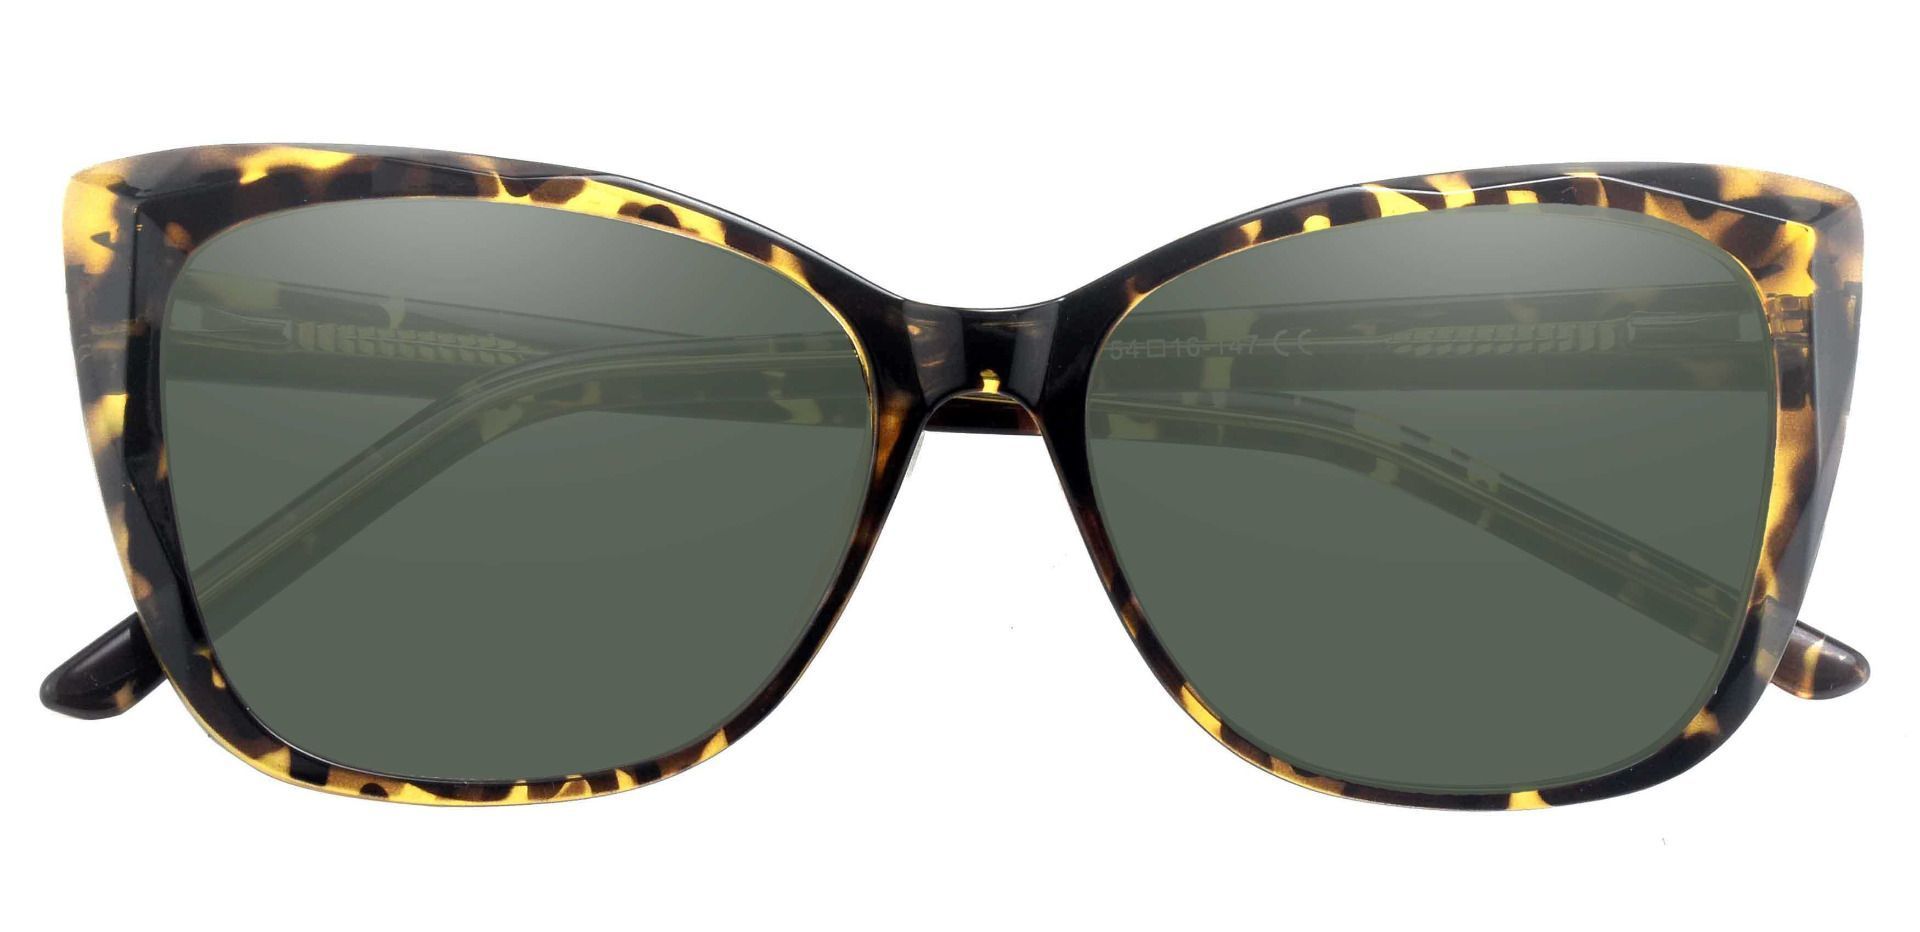 Mabel Square Lined Bifocal Sunglasses - Tortoise Frame With Green Lenses